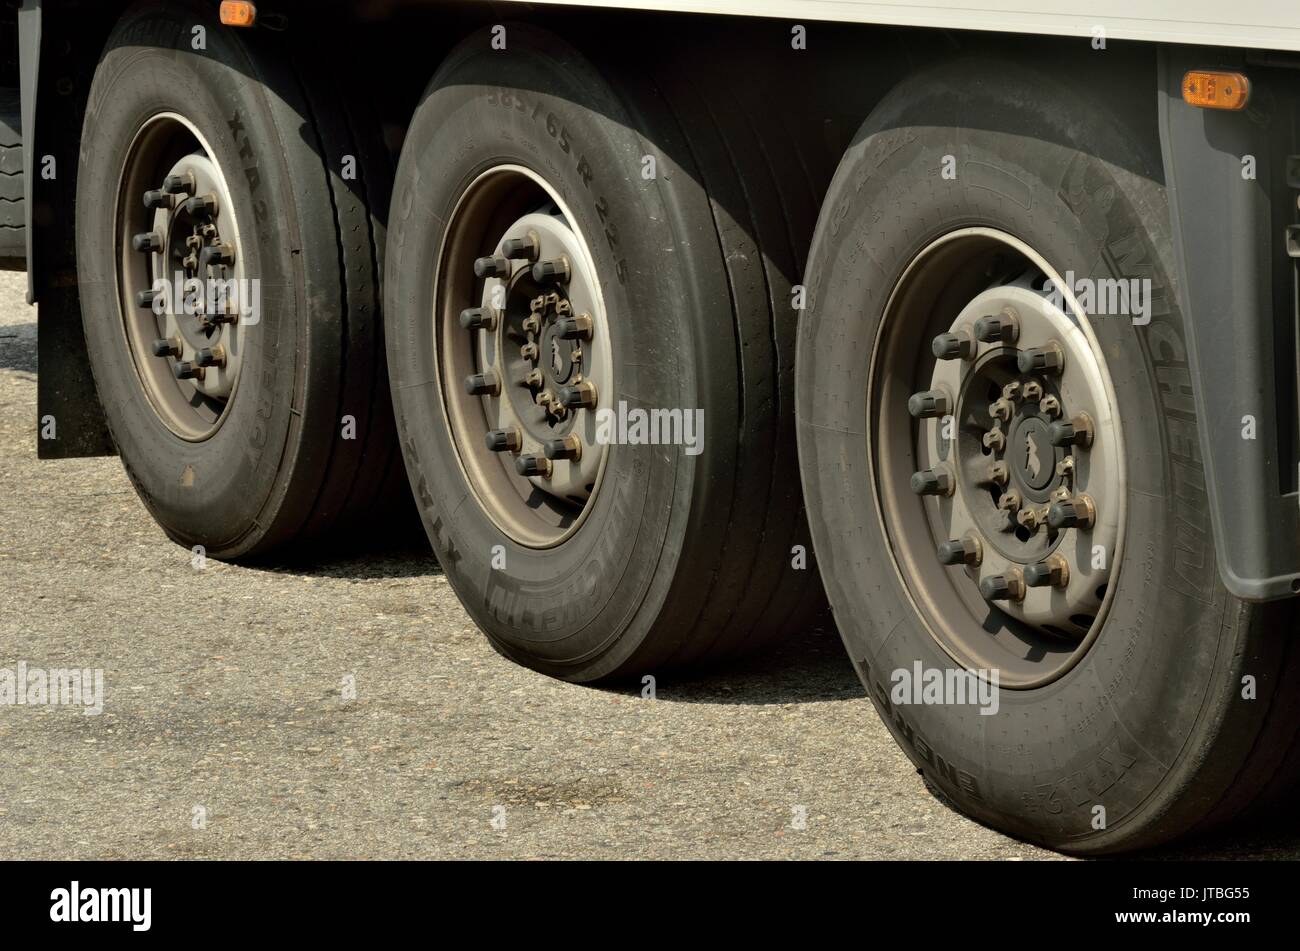 3 Truck Tyres In A row, Italy, Europe Stock Photo